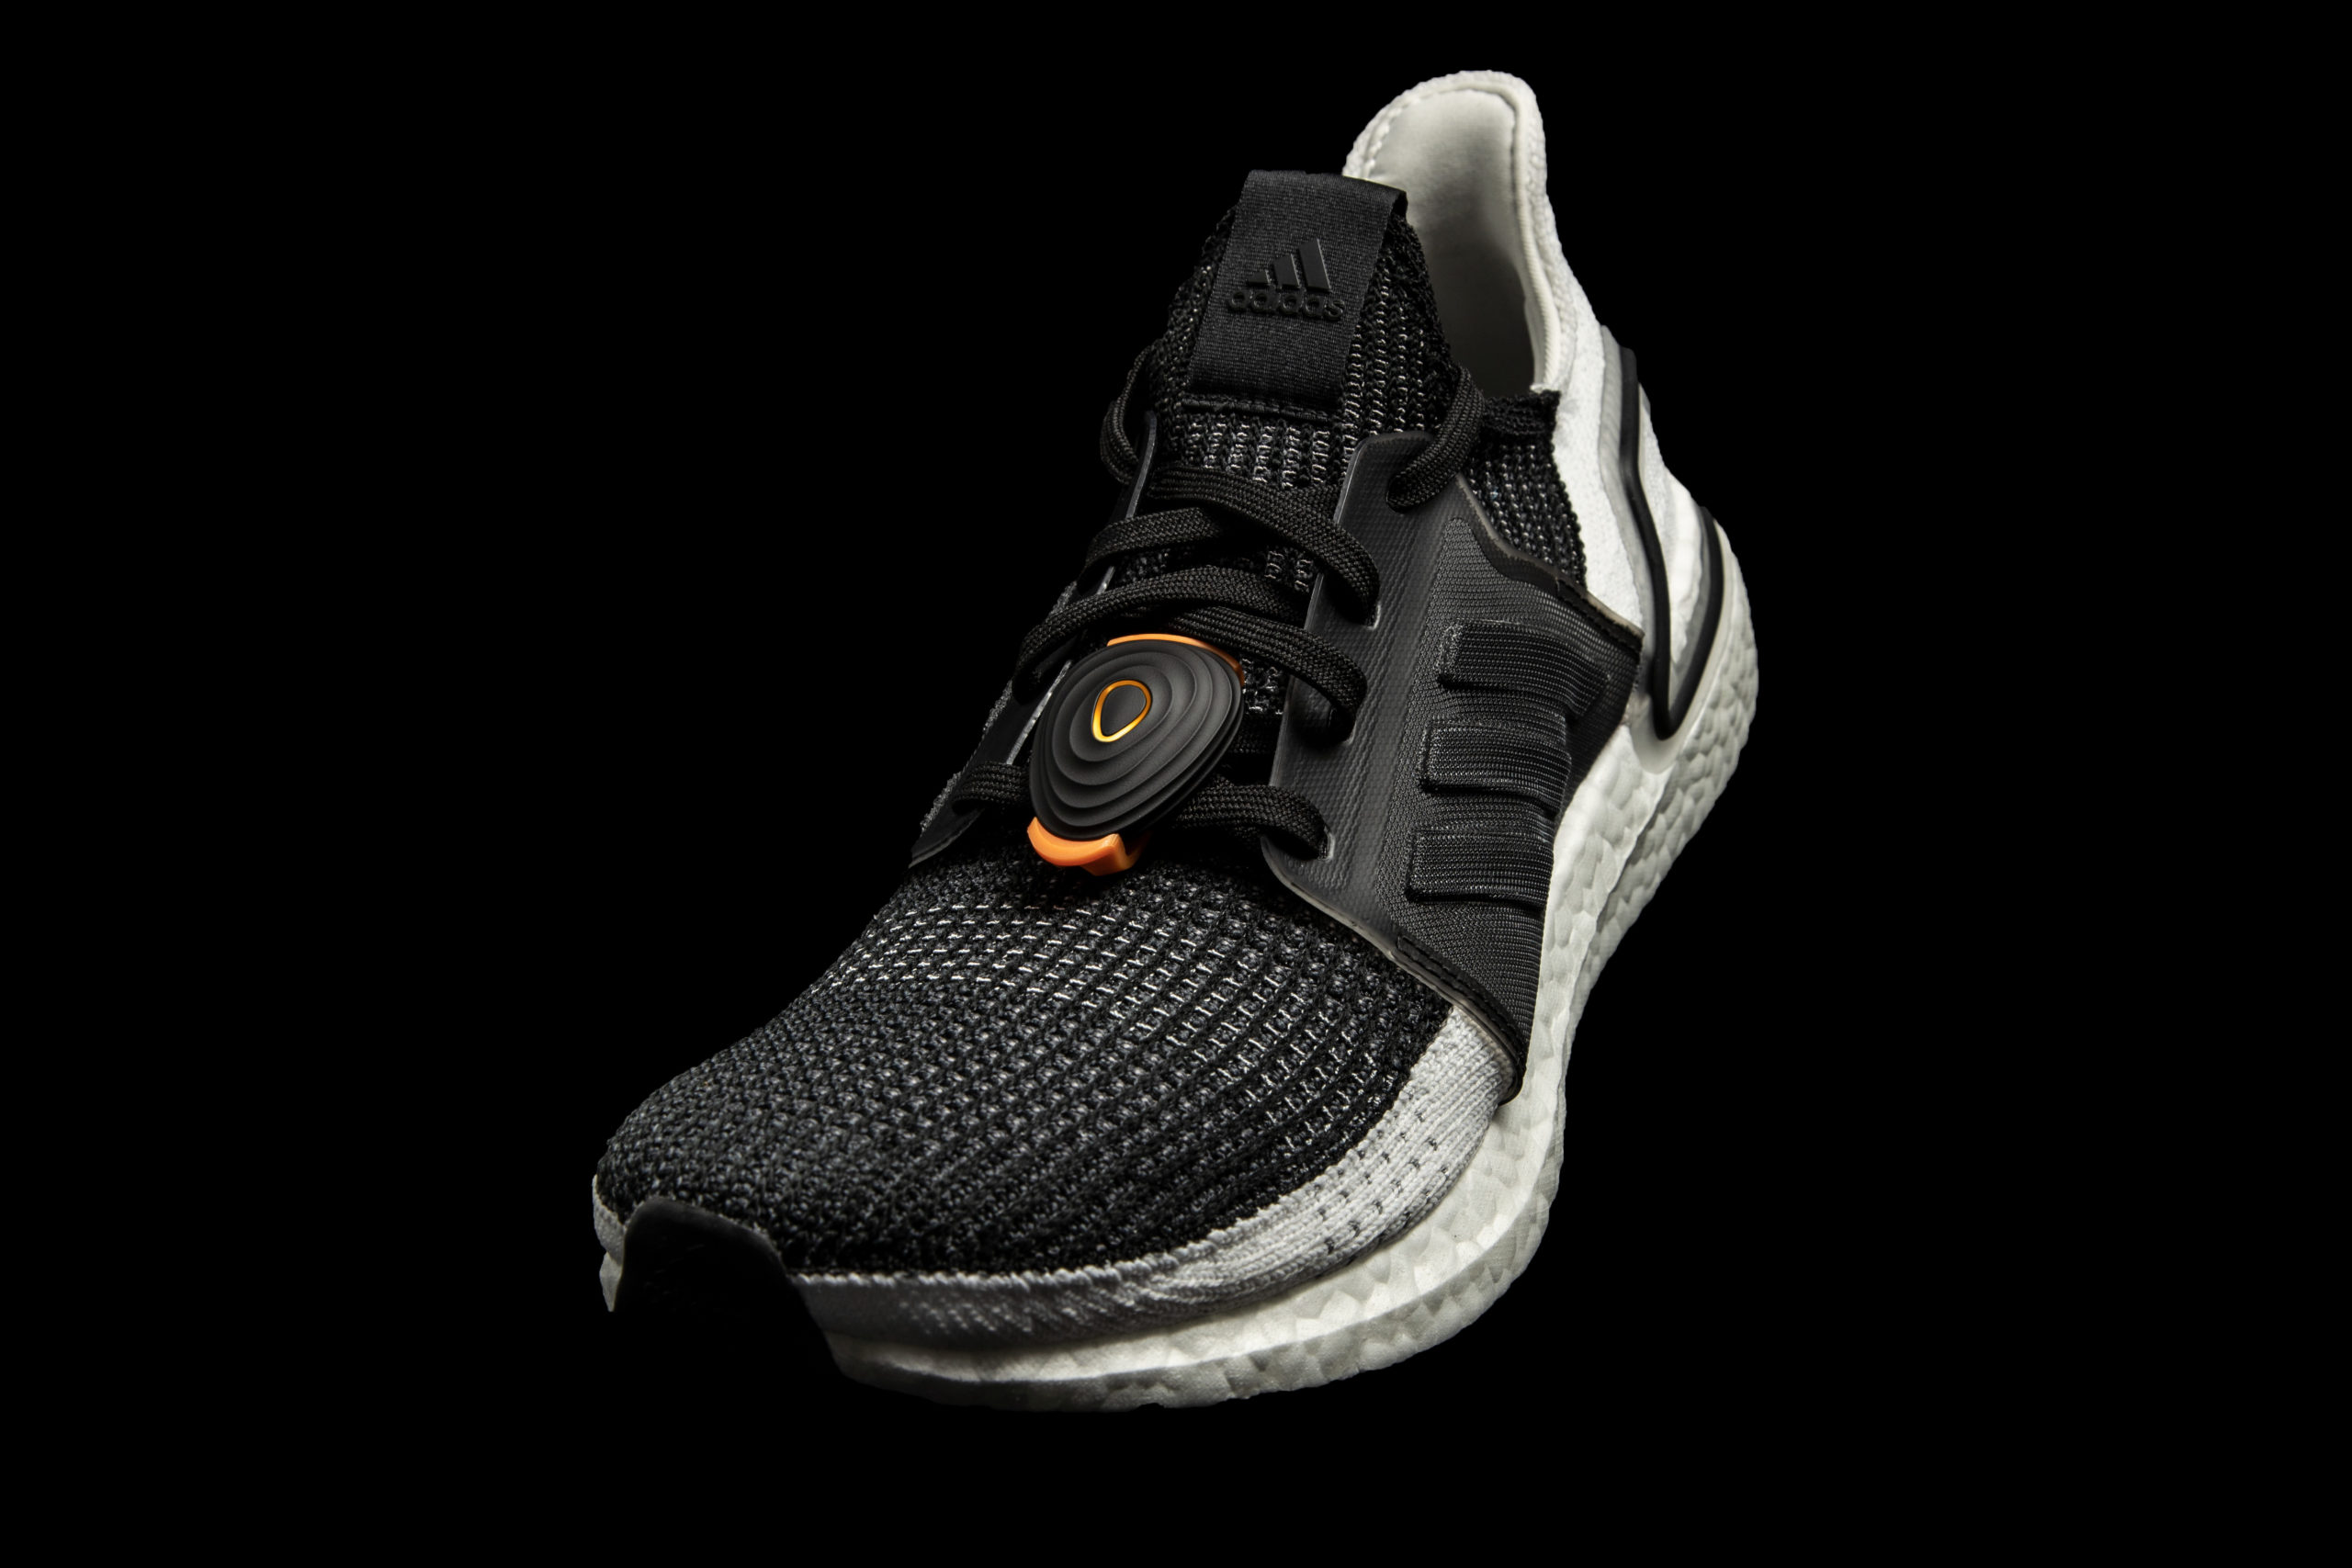 Stryd’s new technology that measures power, makes its way to runners to revolutionize training.